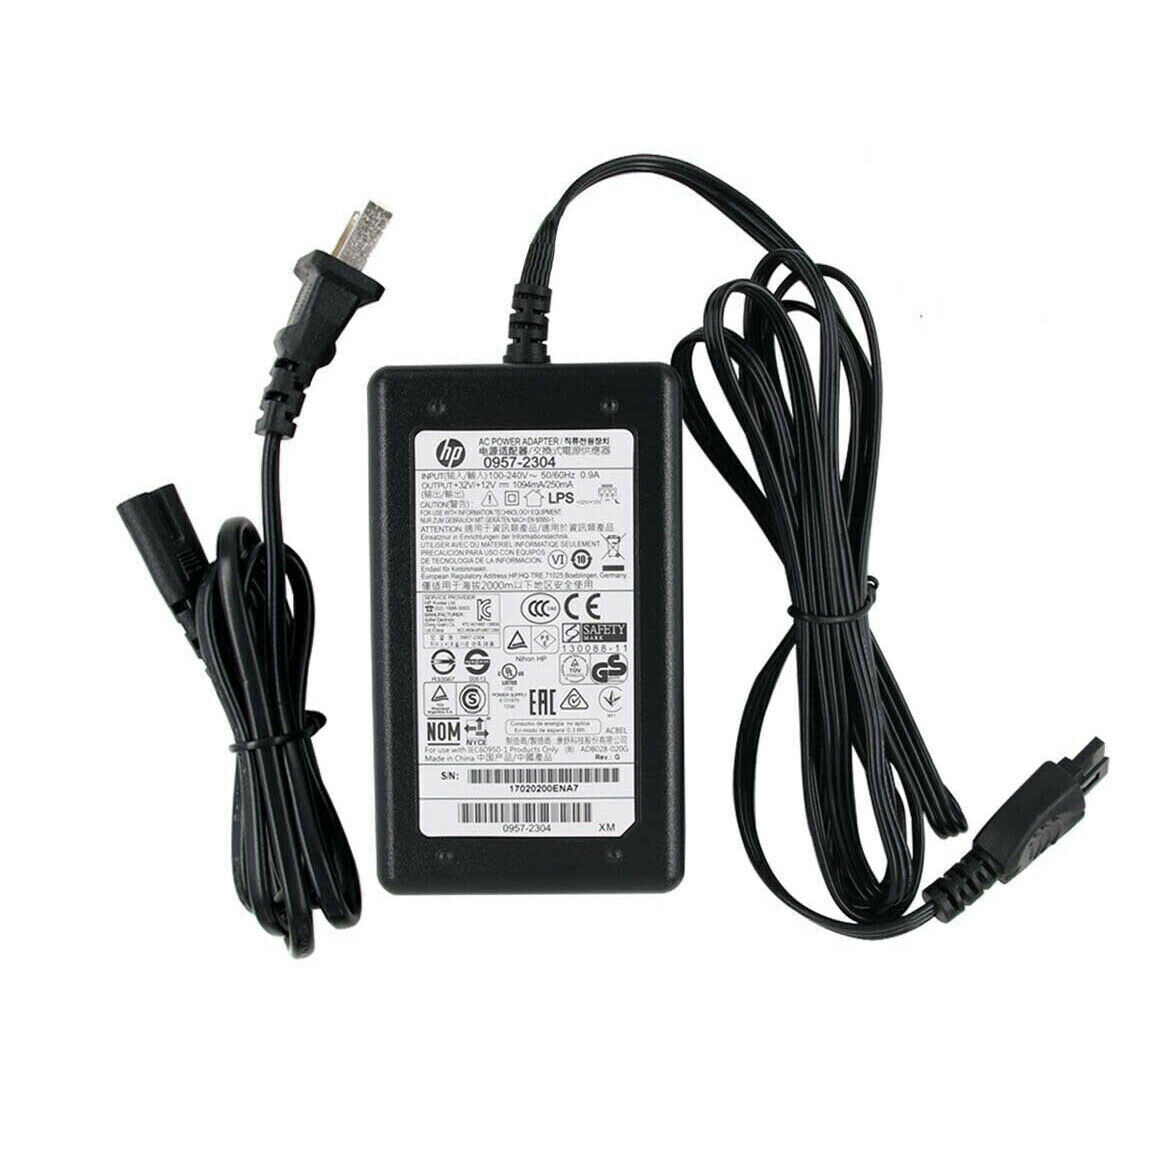 Genuine OEM HP Power Supply AC 7525 A Adapter 7520 Direct stock discount Daily bargain sale Photosmart